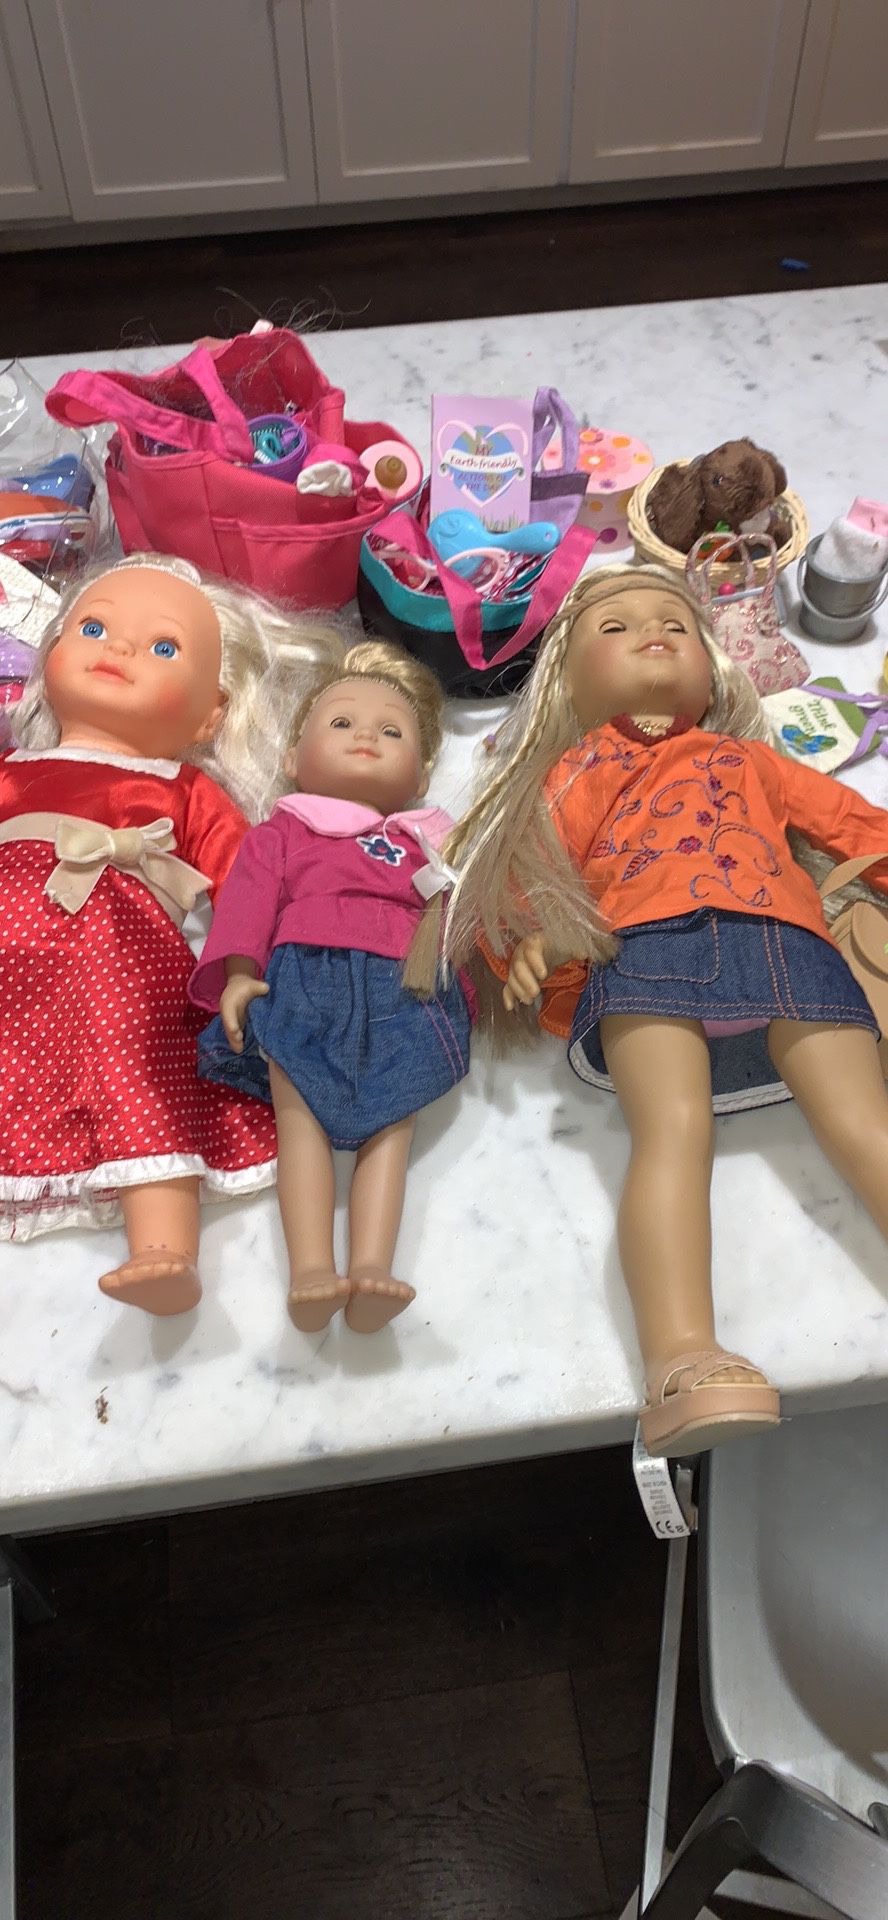 American girl Julie + More Dolls Clothes Accessories Huge Lot